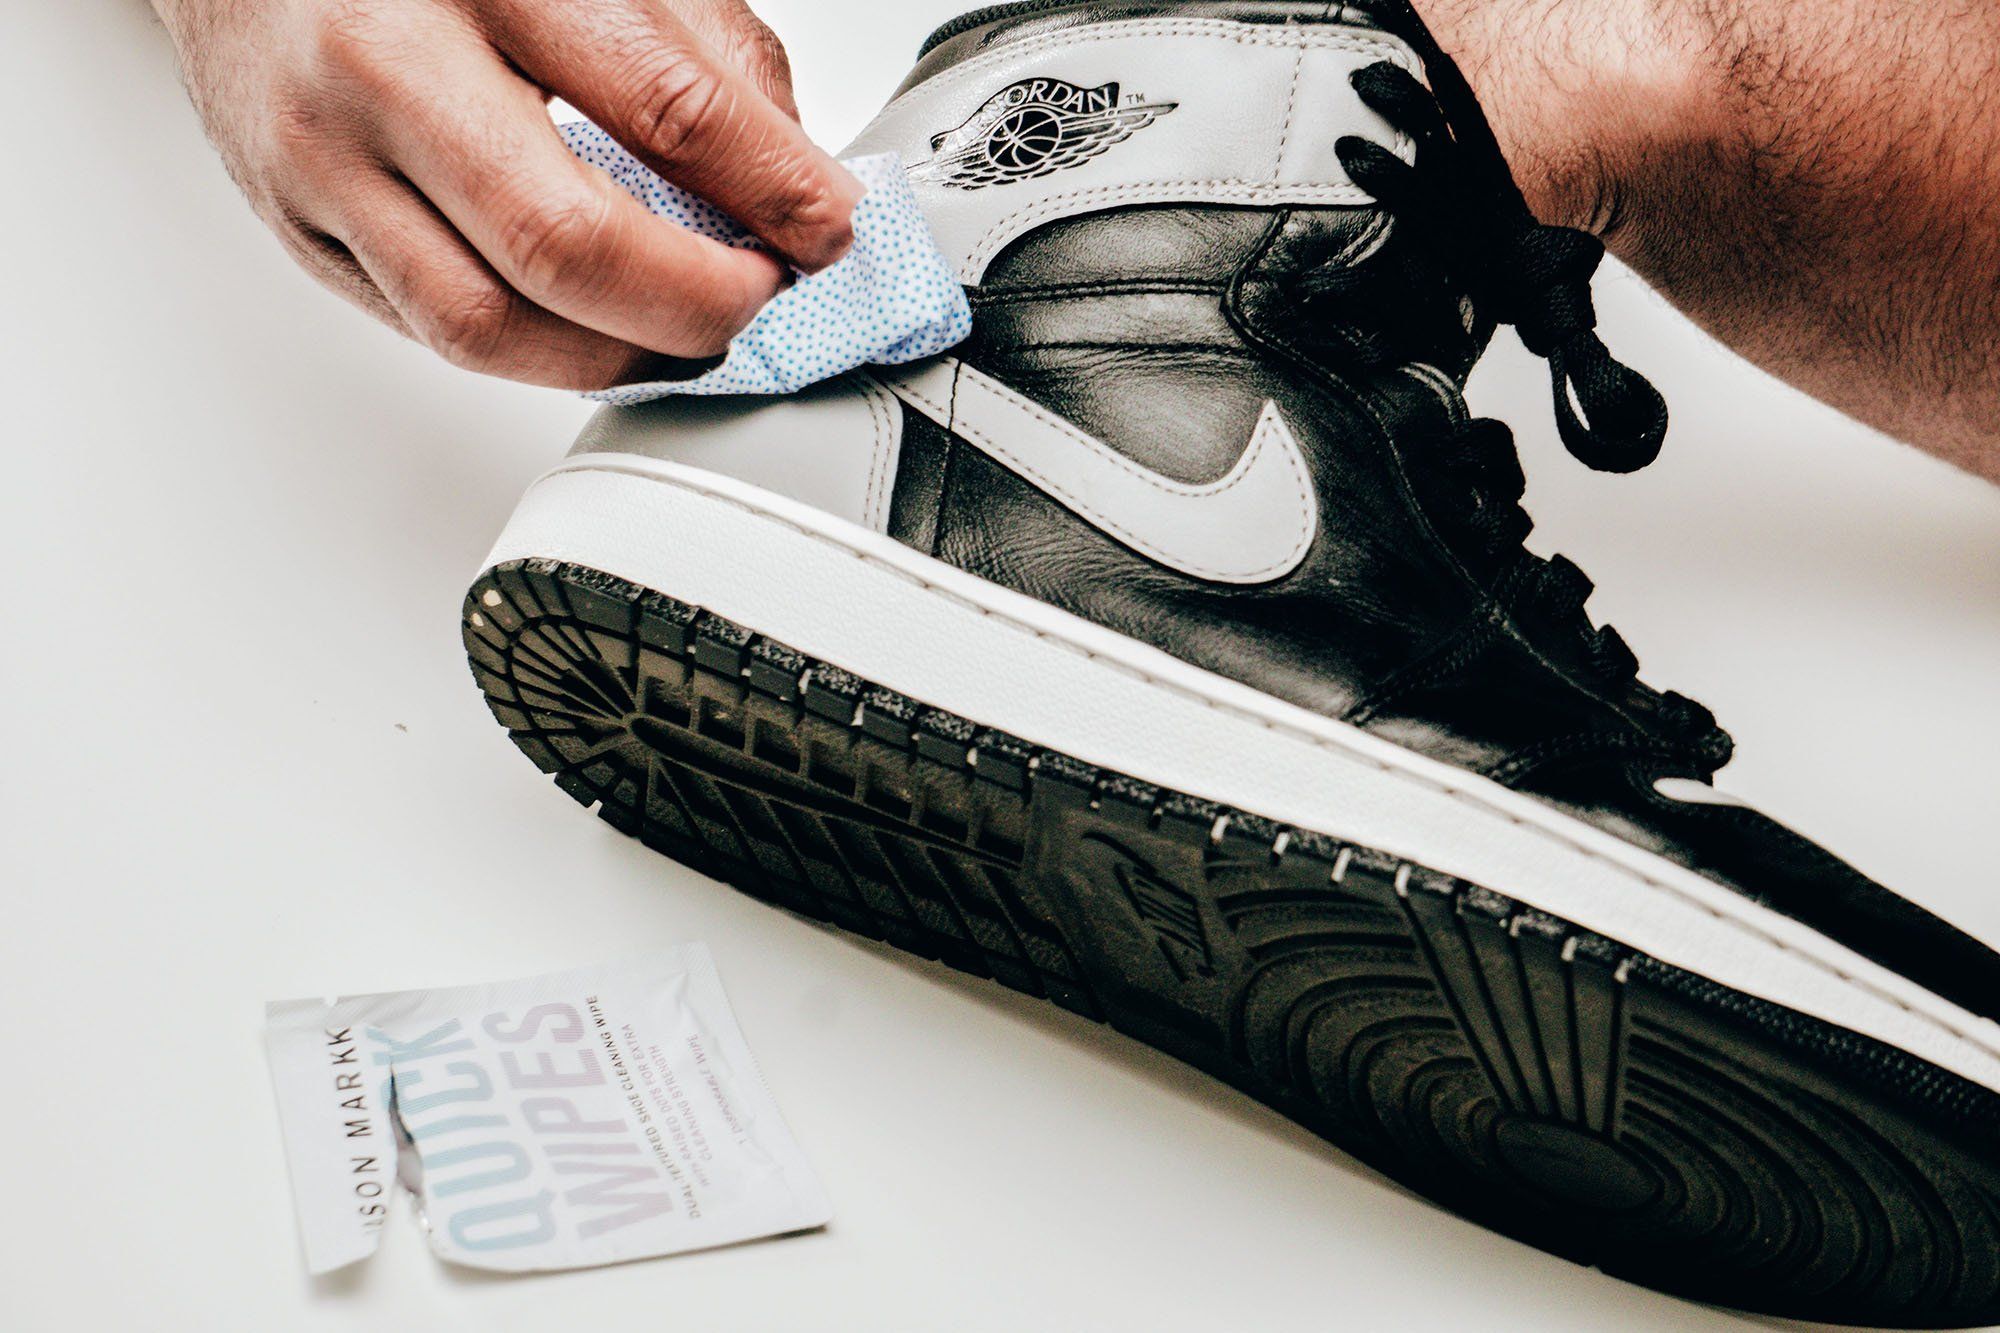 Sneaker care: Here's a step-by-step guide on how to clean your